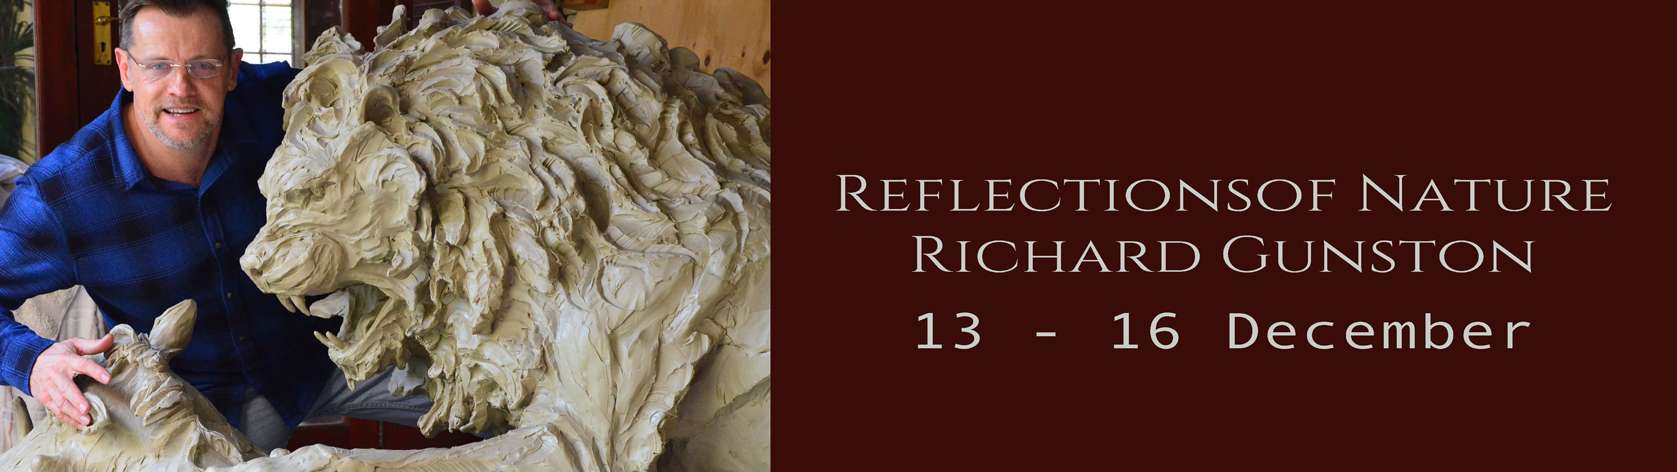 The Studio Art Gallery Exhibition Header - Reflections of Nature by Richard Gunston